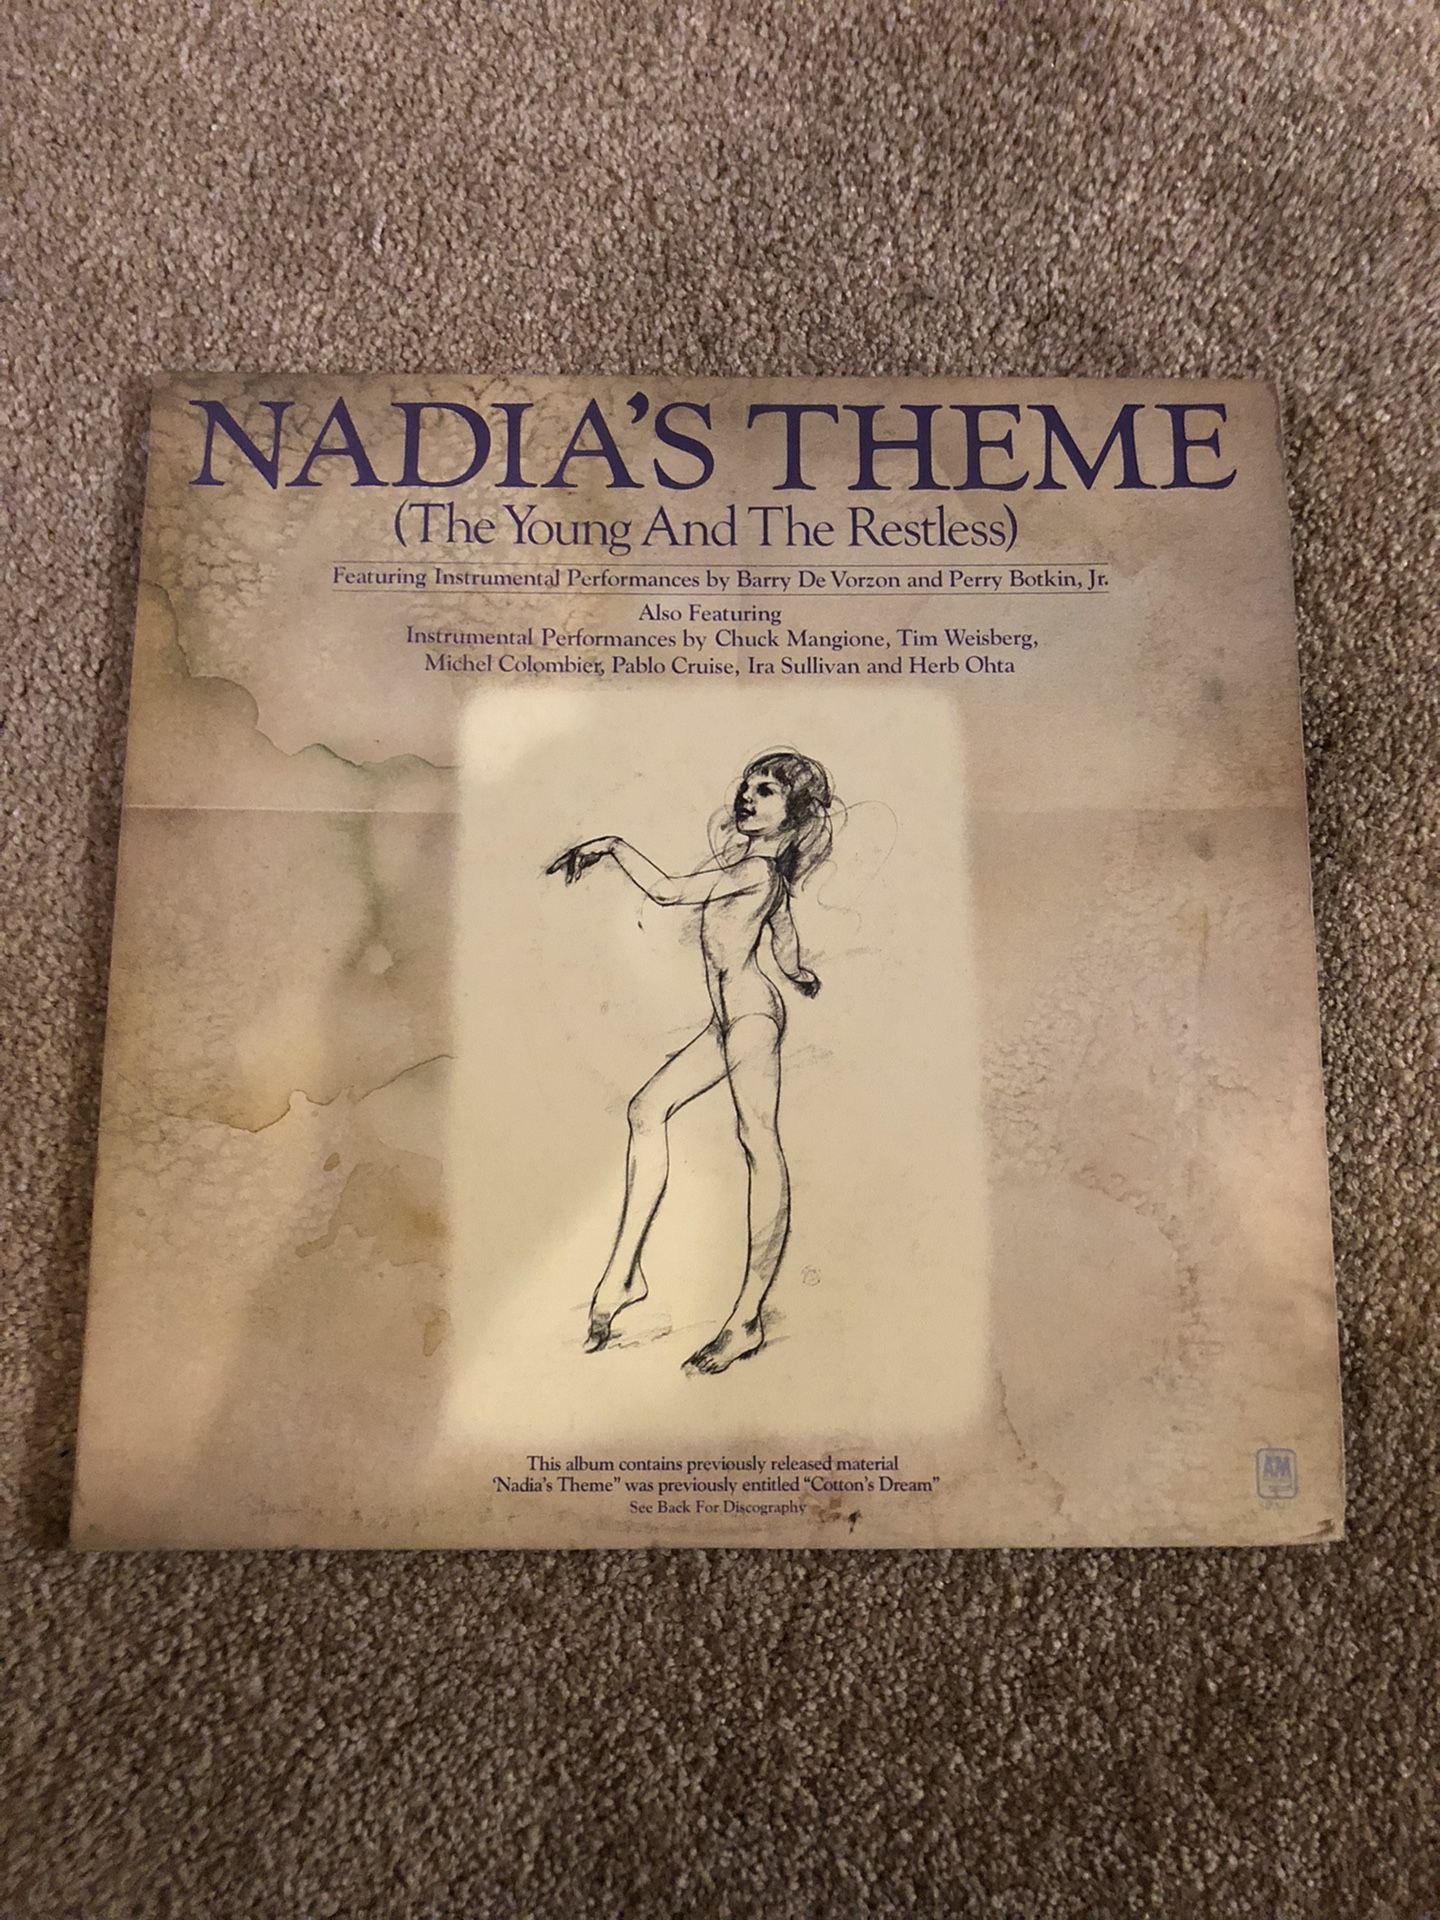 Nadia’s Theme The Young And The Restless Vinyl LP Record 1976